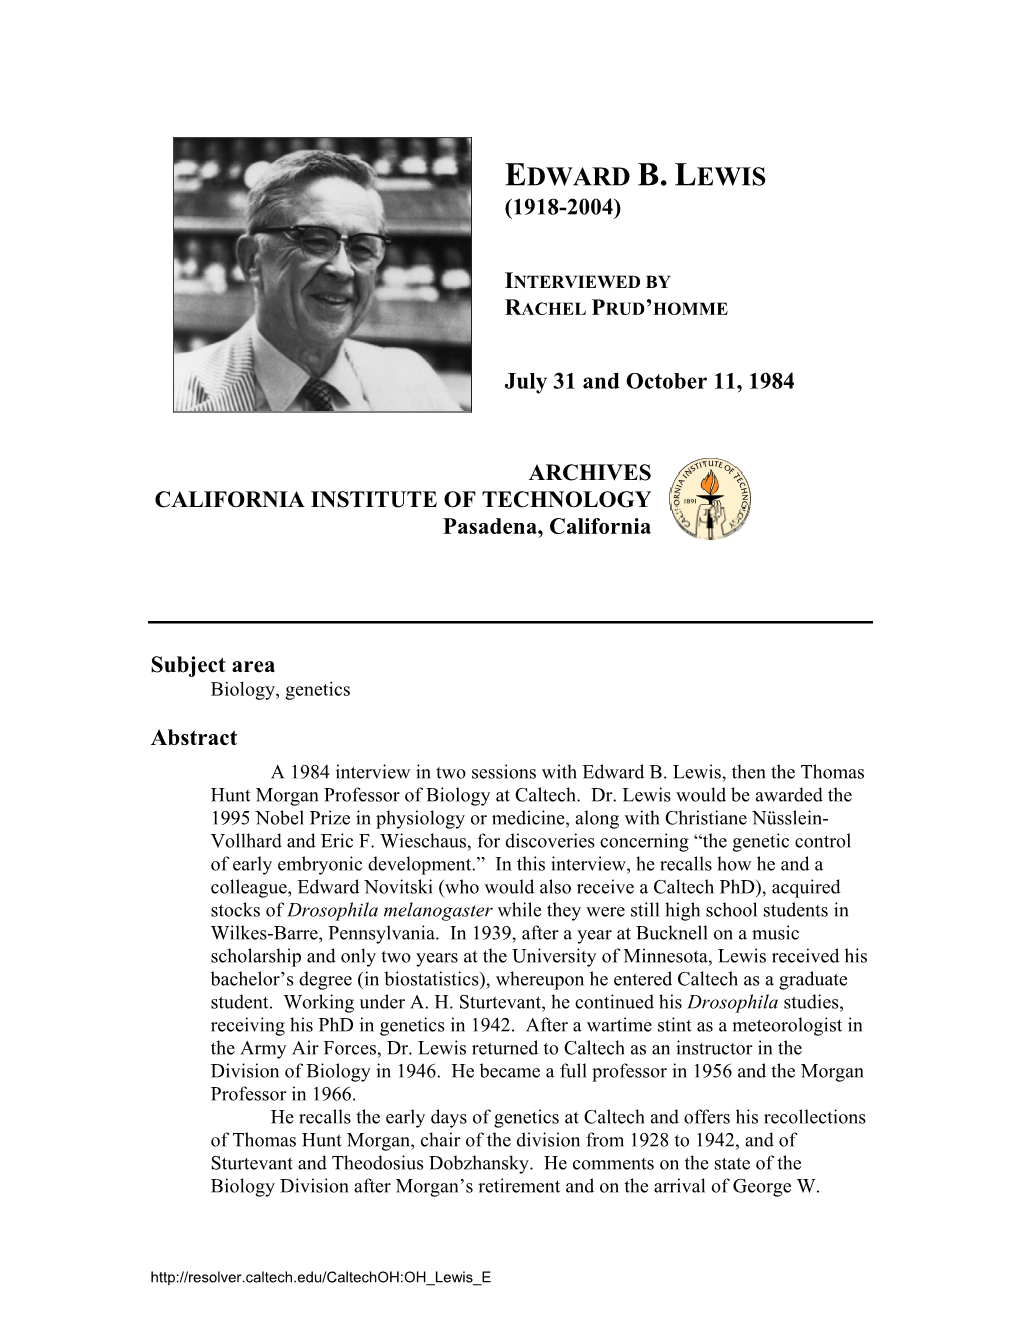 Interview with Edward B. Lewis